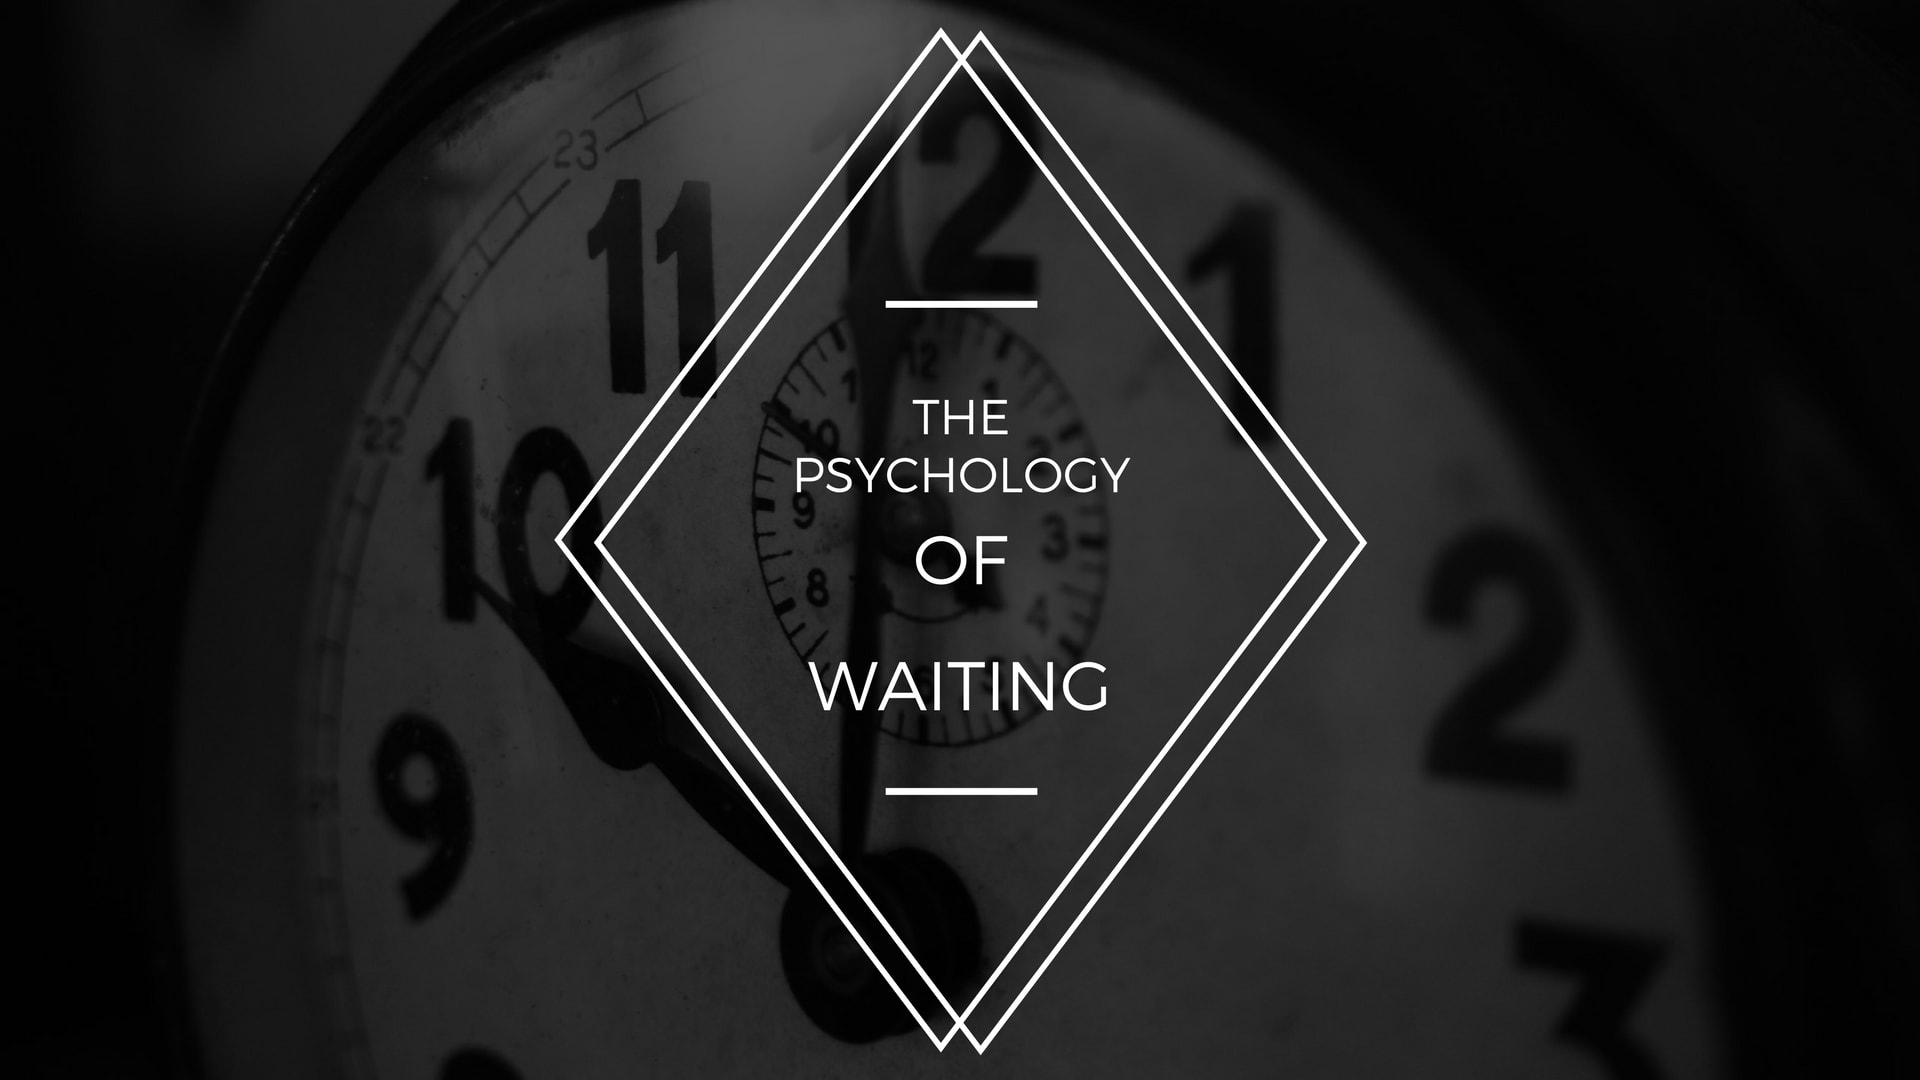 The Pain of Waiting and Psychology of Queues